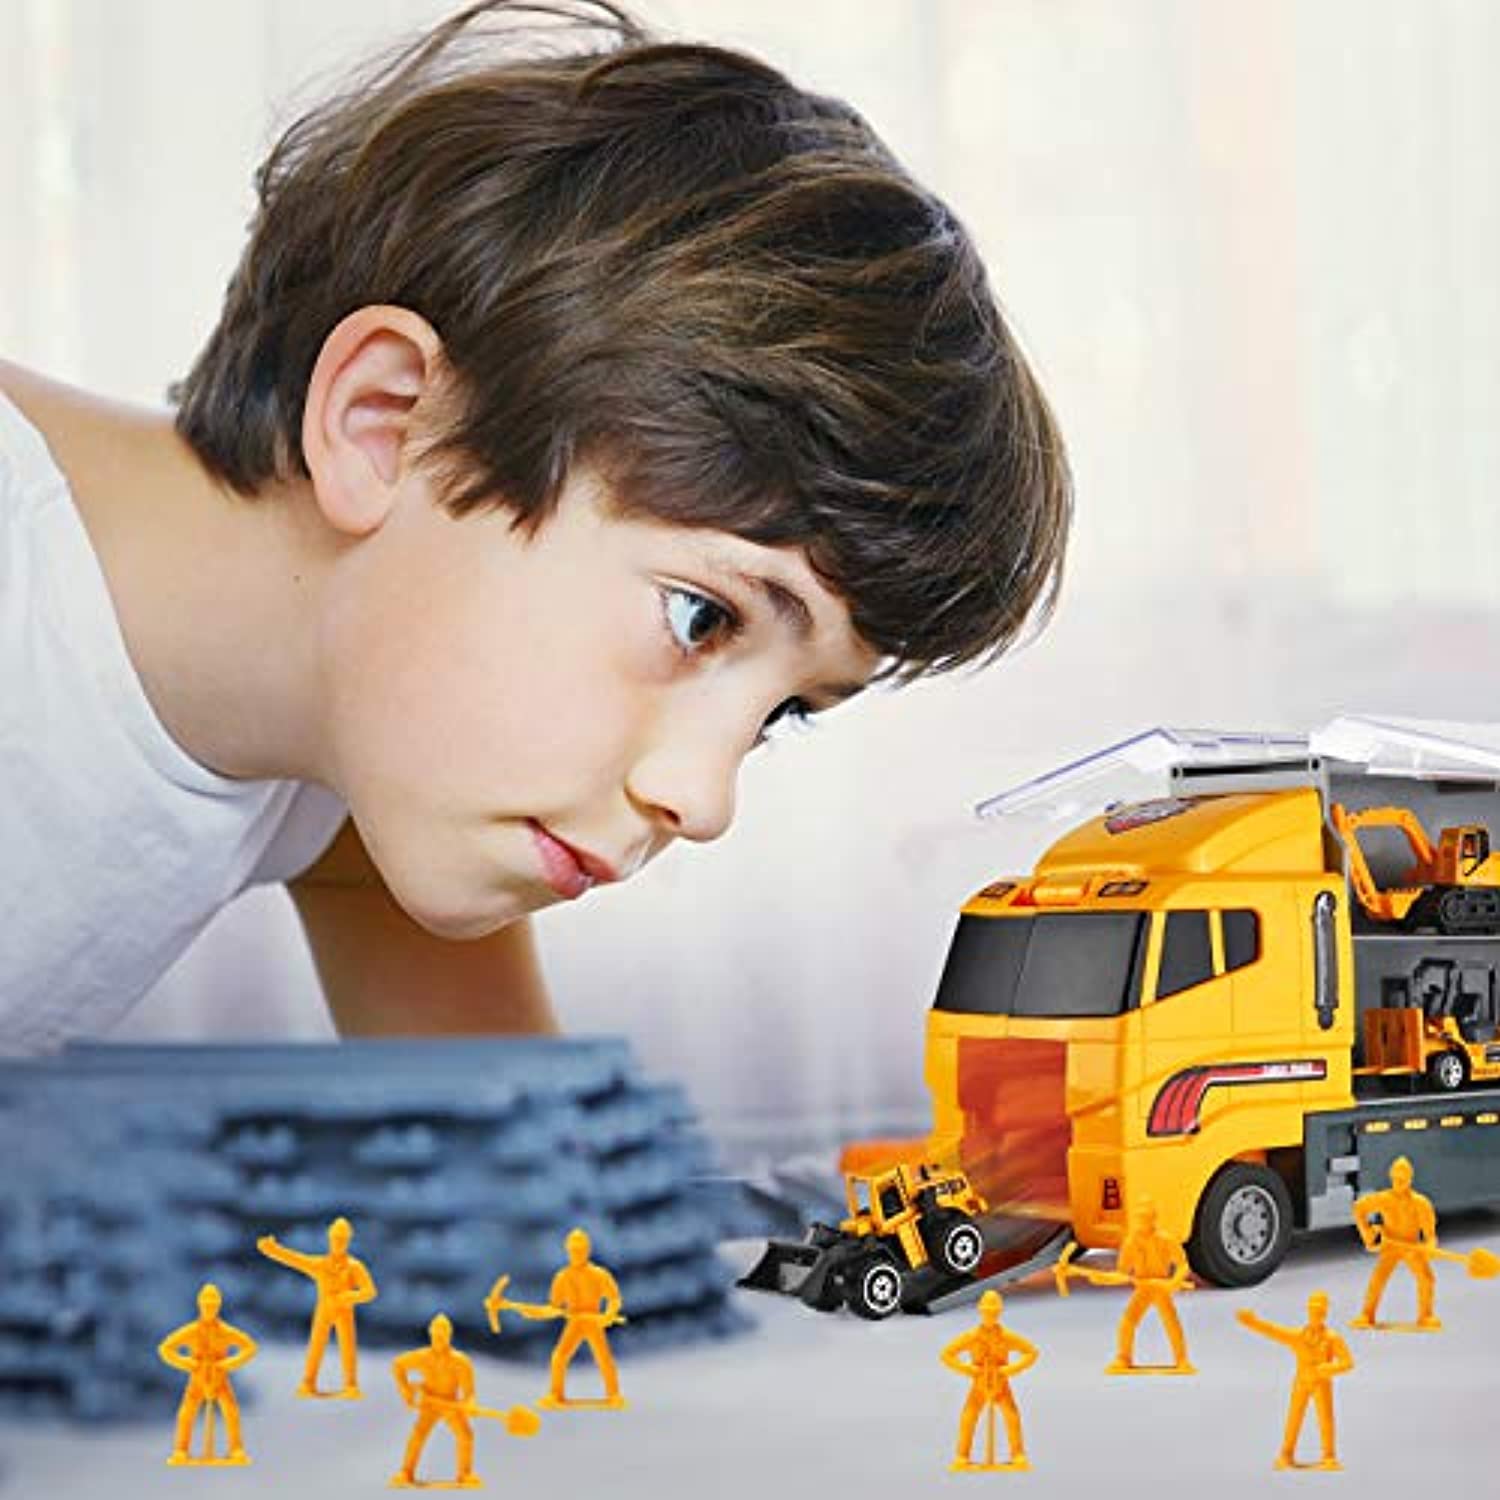 19 in 1 Construction Truck with Engineering Worker Toy Set, Mini Die-Cast Engine Car in Carrier Truck, Double Side Transport Vehicle Play for Child Kid Boy Girl Birthday Christmas Party Favors - image 7 of 7